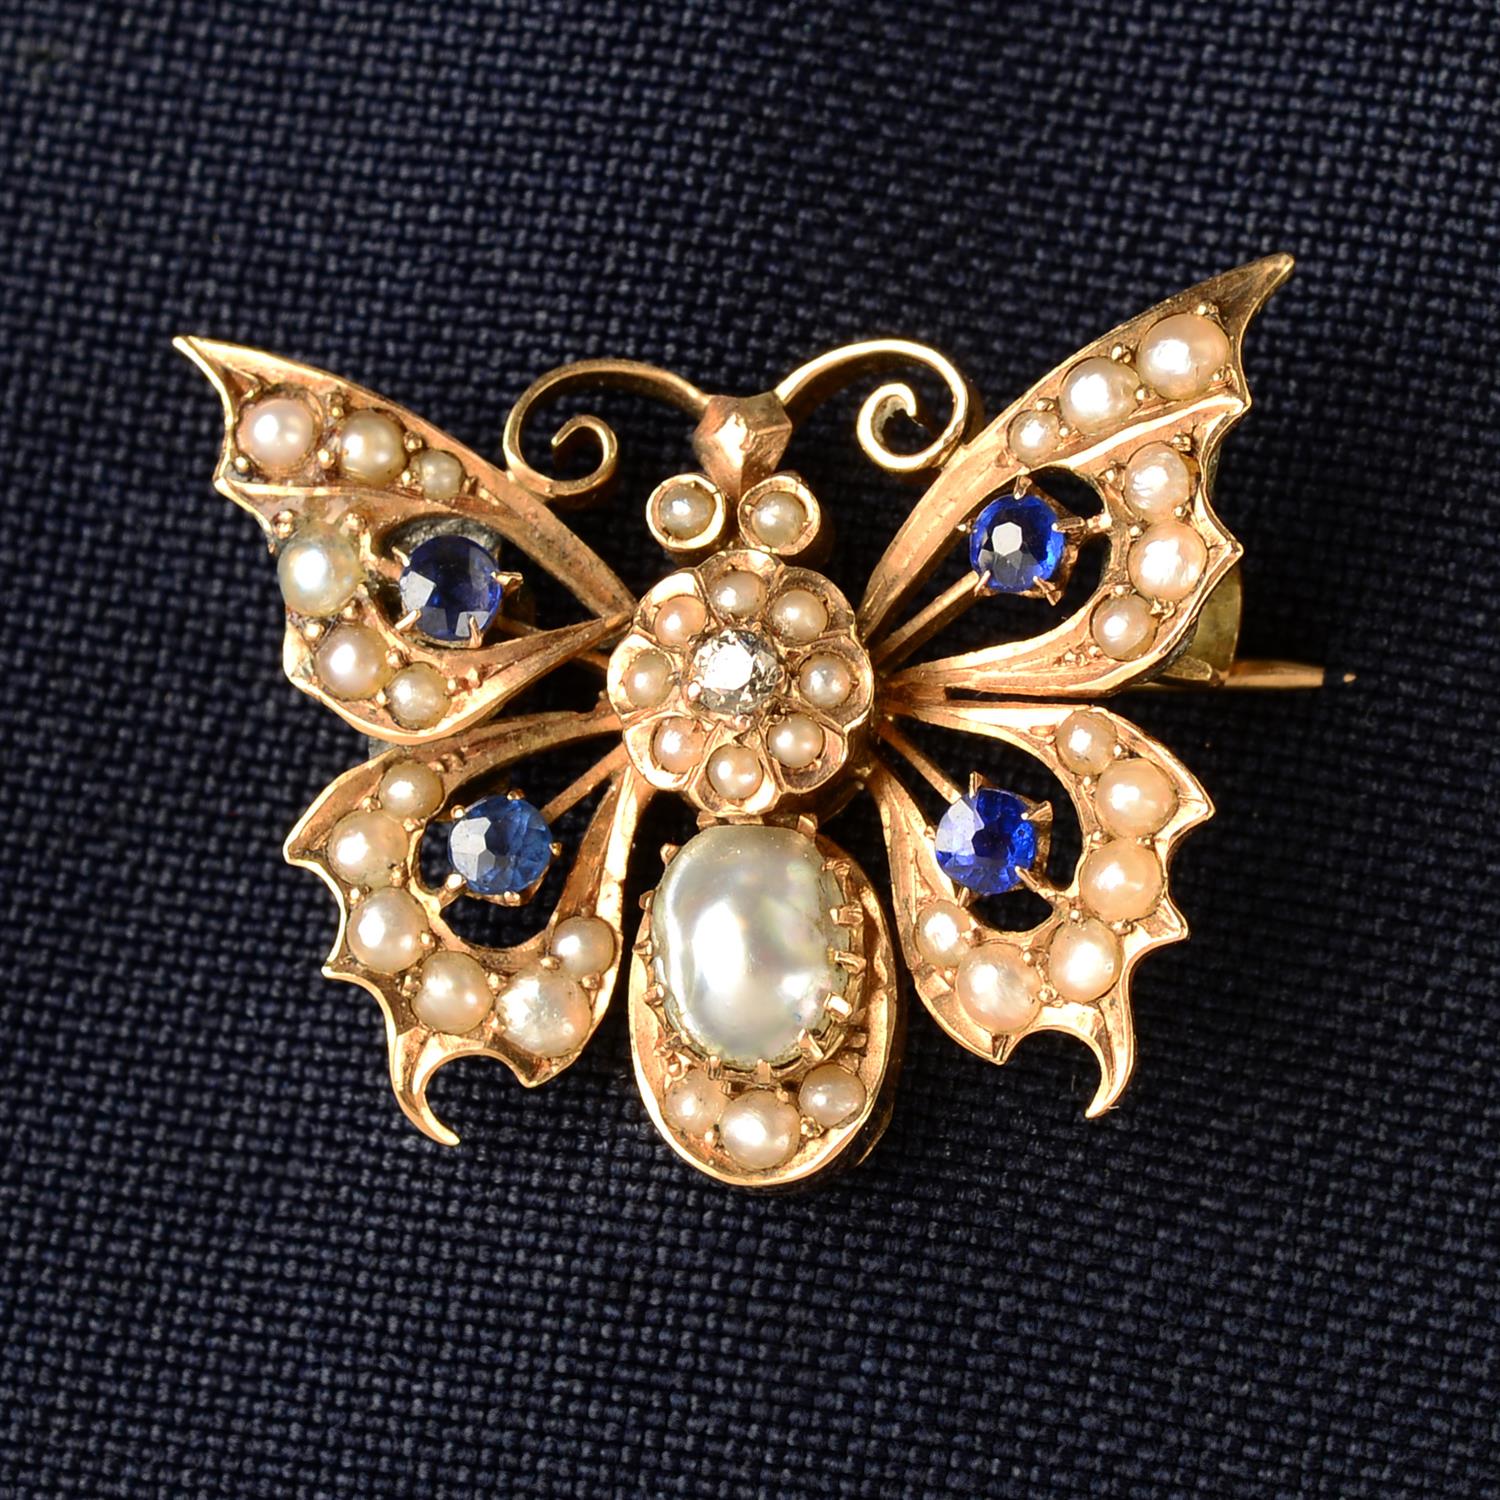 A late 19th century gold, diamond, garnet-topped-doublet and split pearl butterfly brooch.